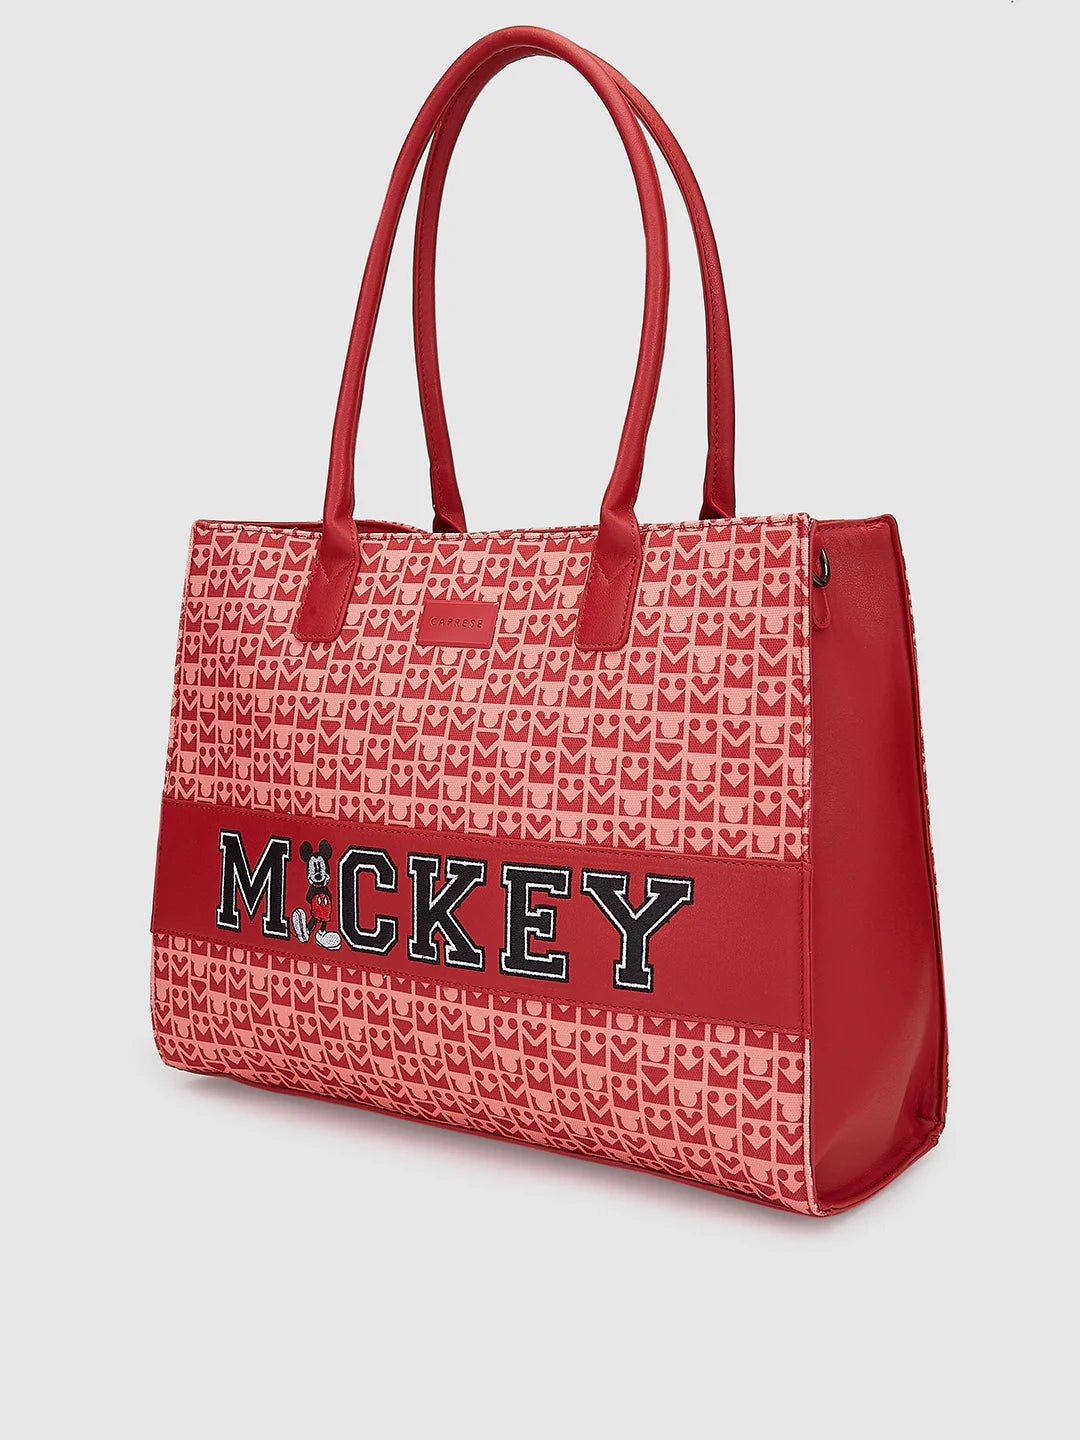 Caprese Disney Inspired  Graphic Printed Mickey Mouse Collection Tote Laptop Compatible Handbag